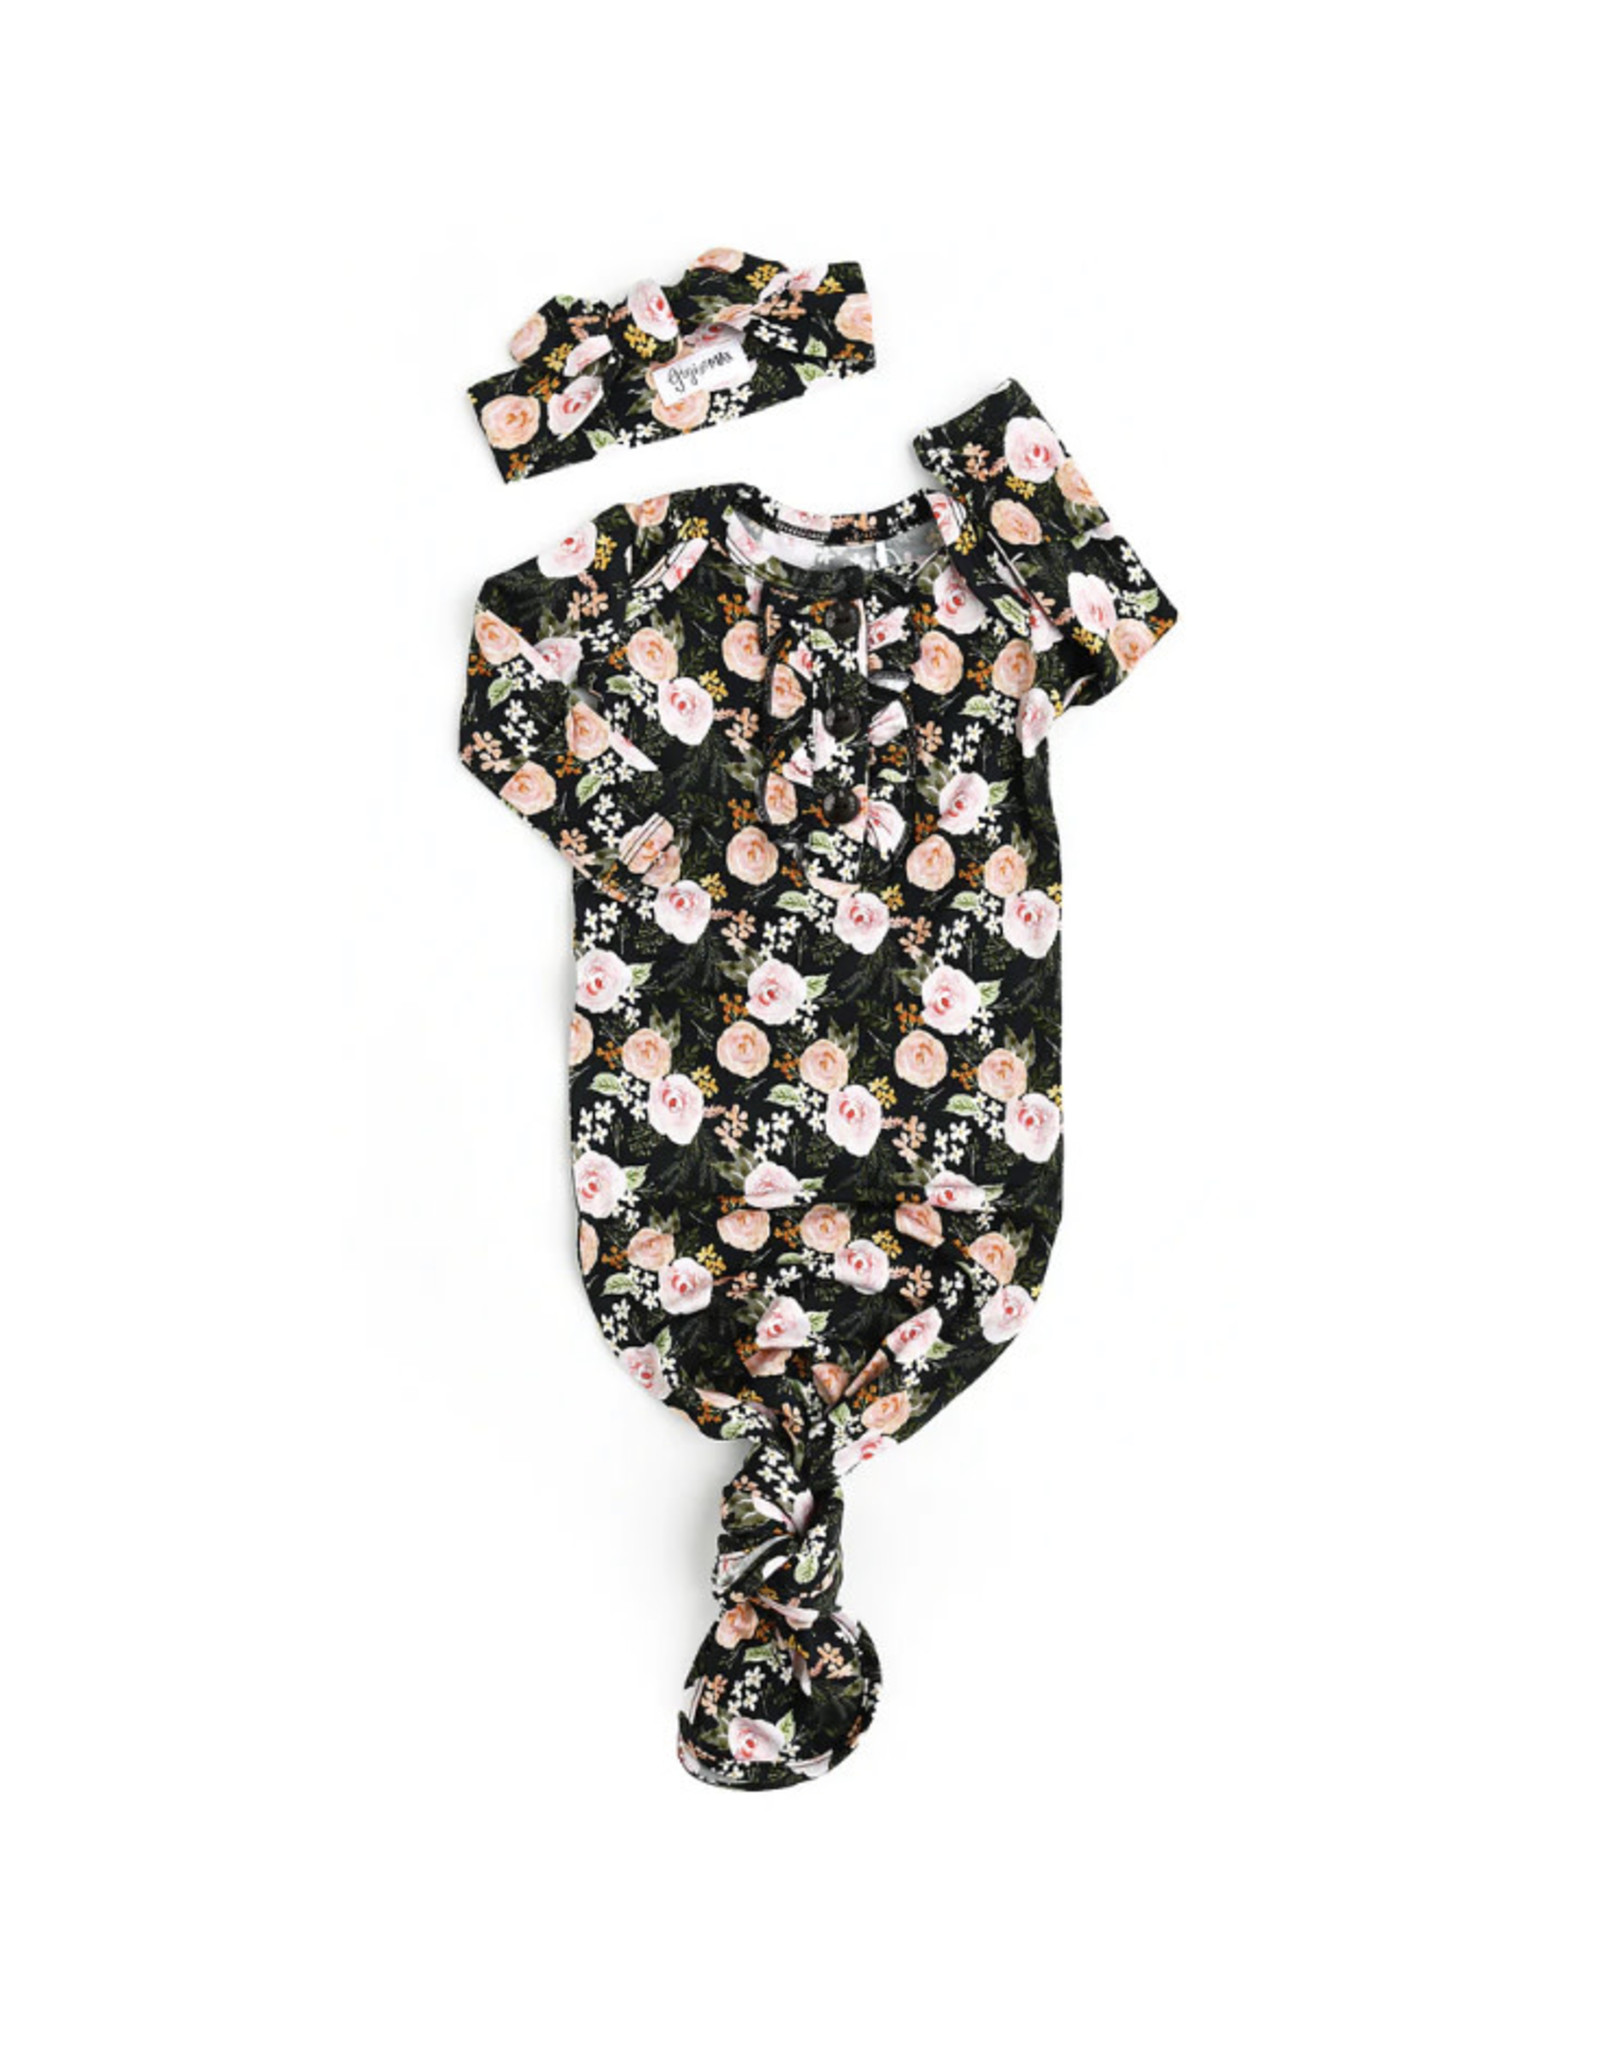 Gigi & Max Gigi & Max- Madeline Floral Ruffle Knotted Ruffle Button Gown/Headband